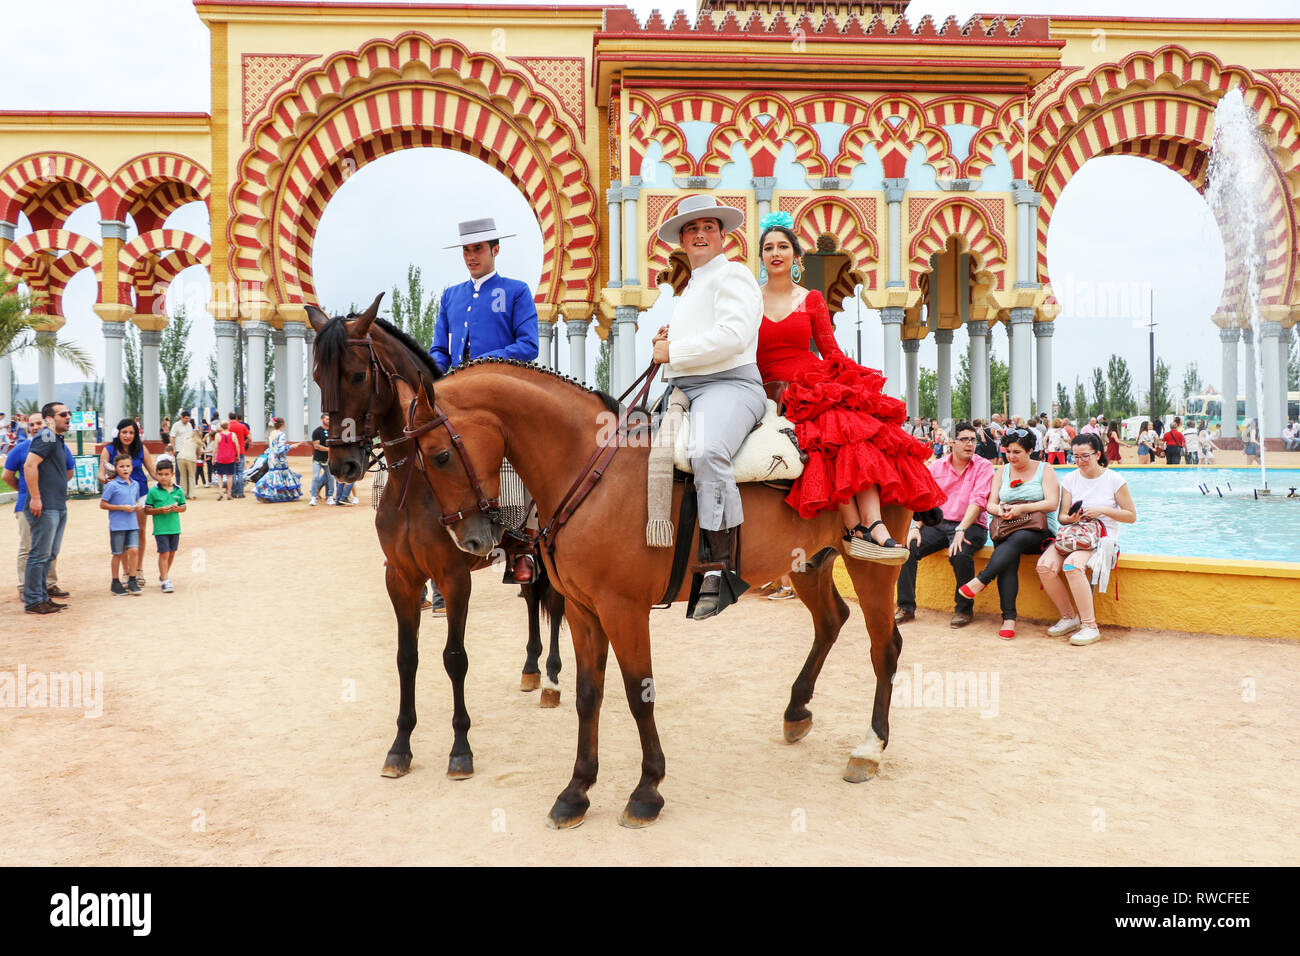 Horse riders at the Cordoba's April Fair Spain Europe. Editorial Use Only. - Image Stock Photo